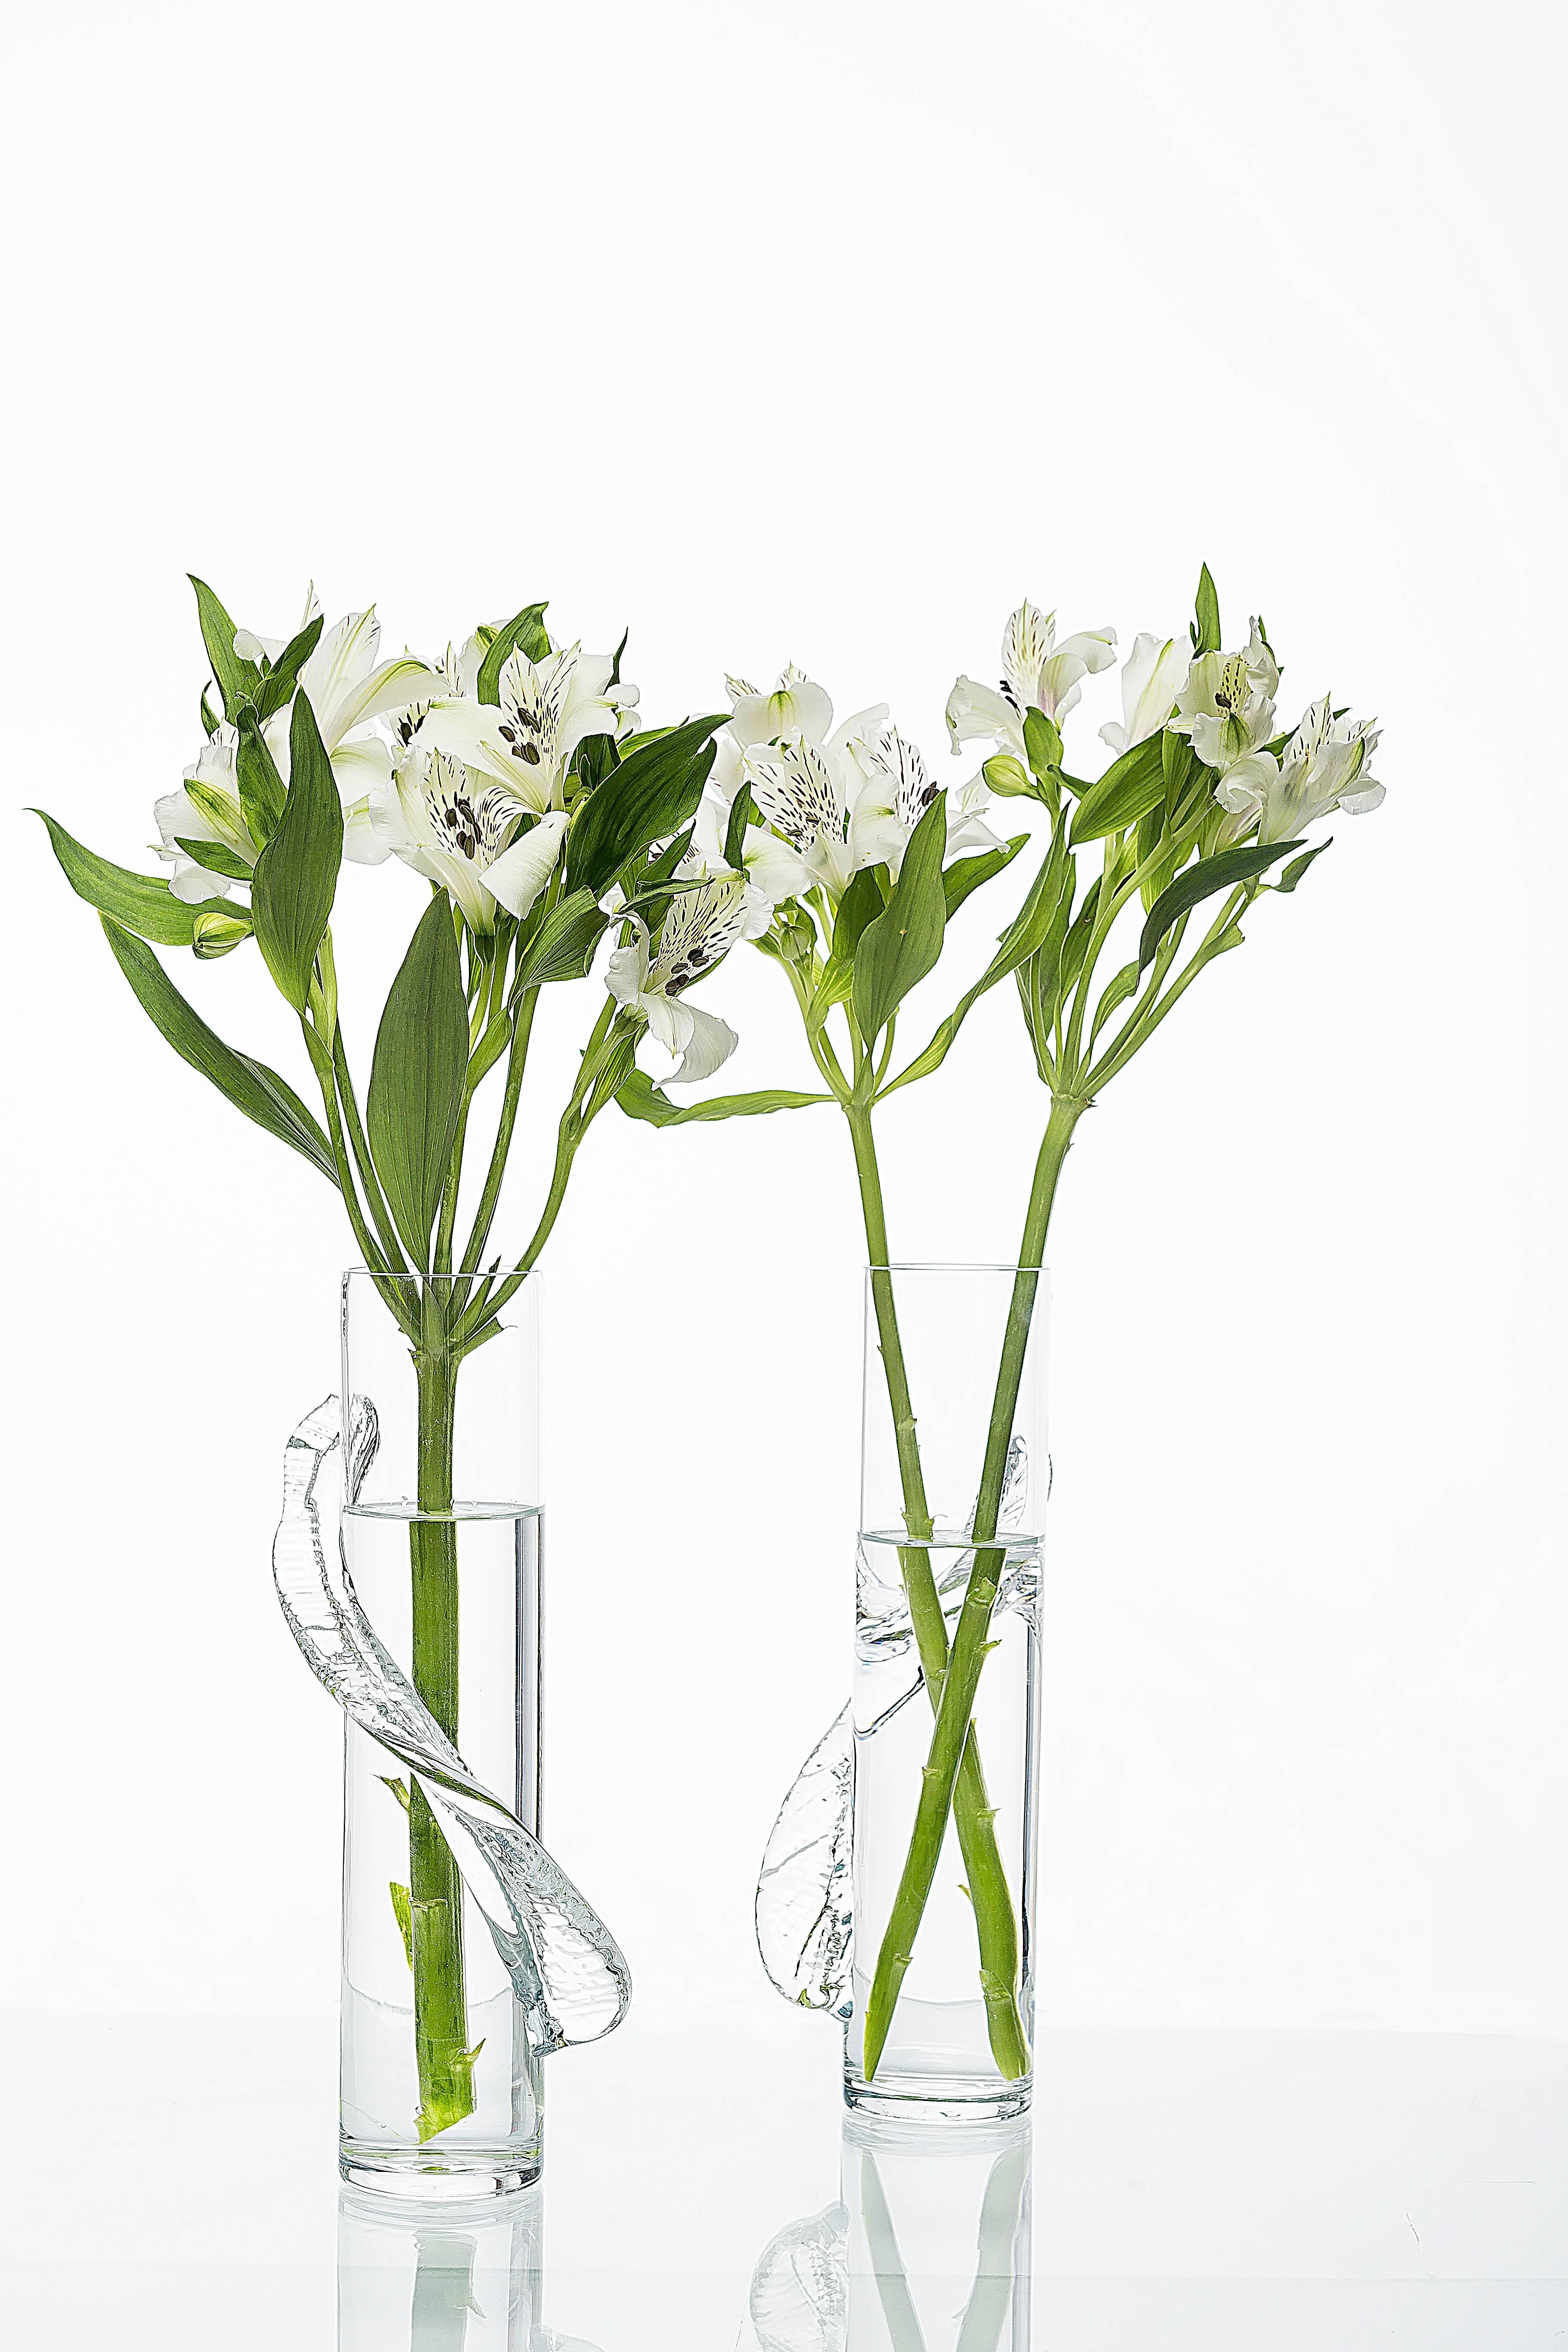 Glass Flower Vase, Transparent, Brazilian Design In New Condition For Sale In Sao Paulo, SP